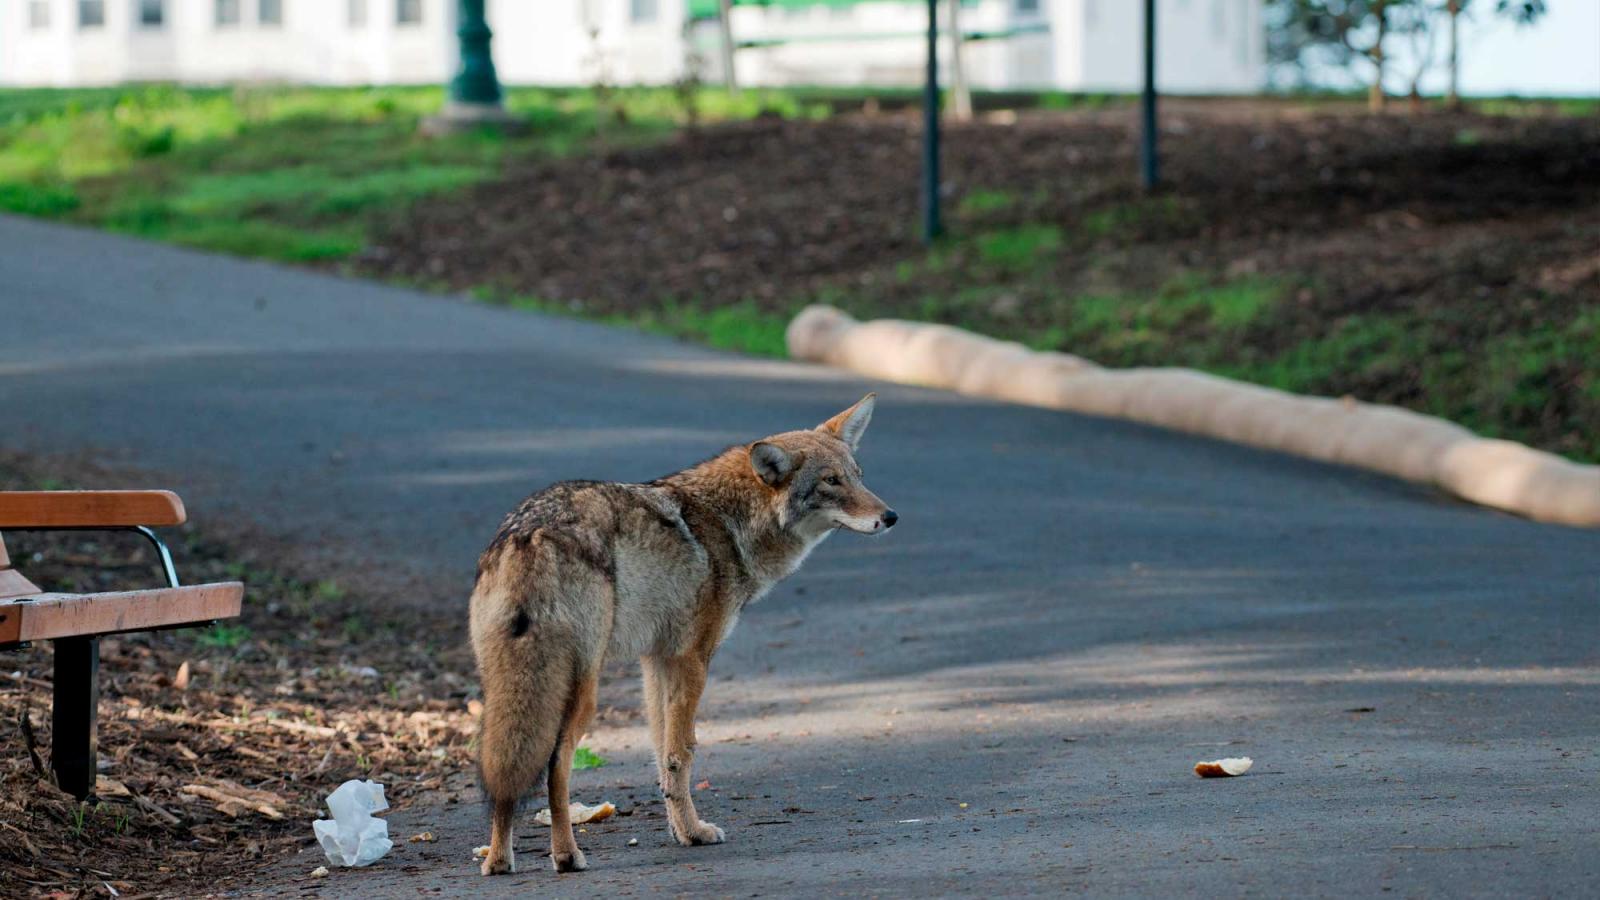 Coyote at a park.